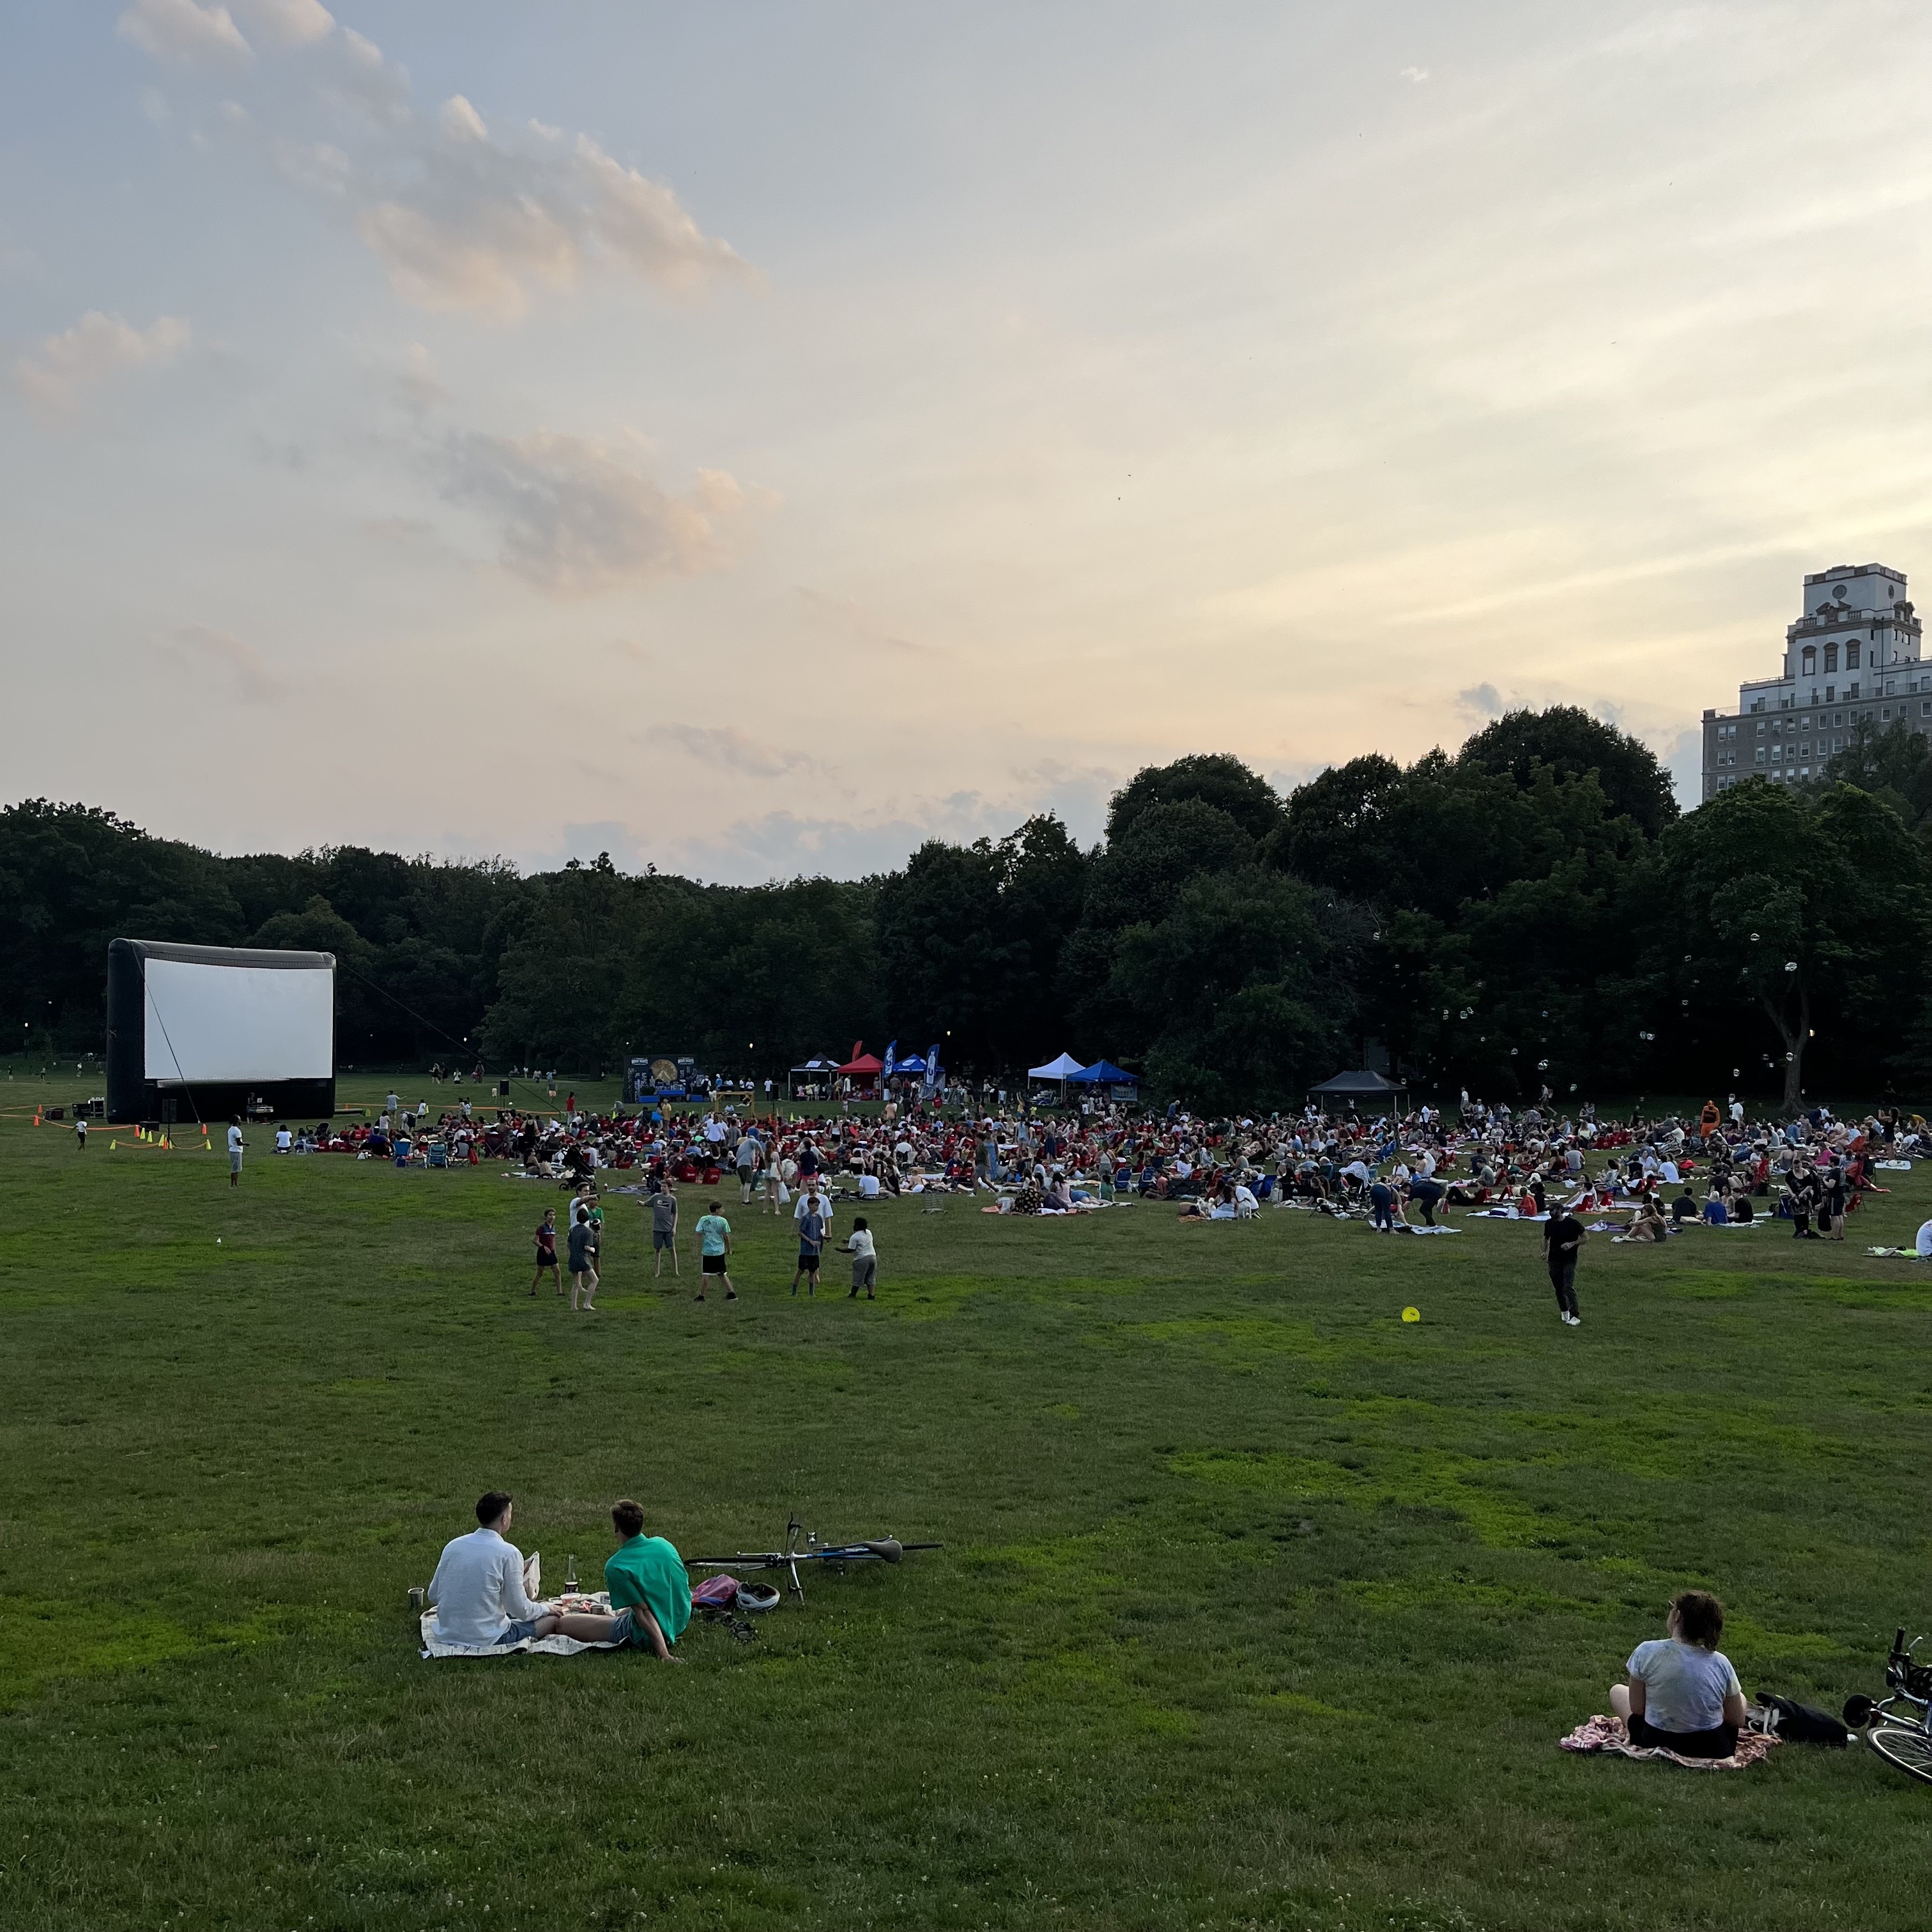 Movie night in the park. Prospect Park, Brooklyn.